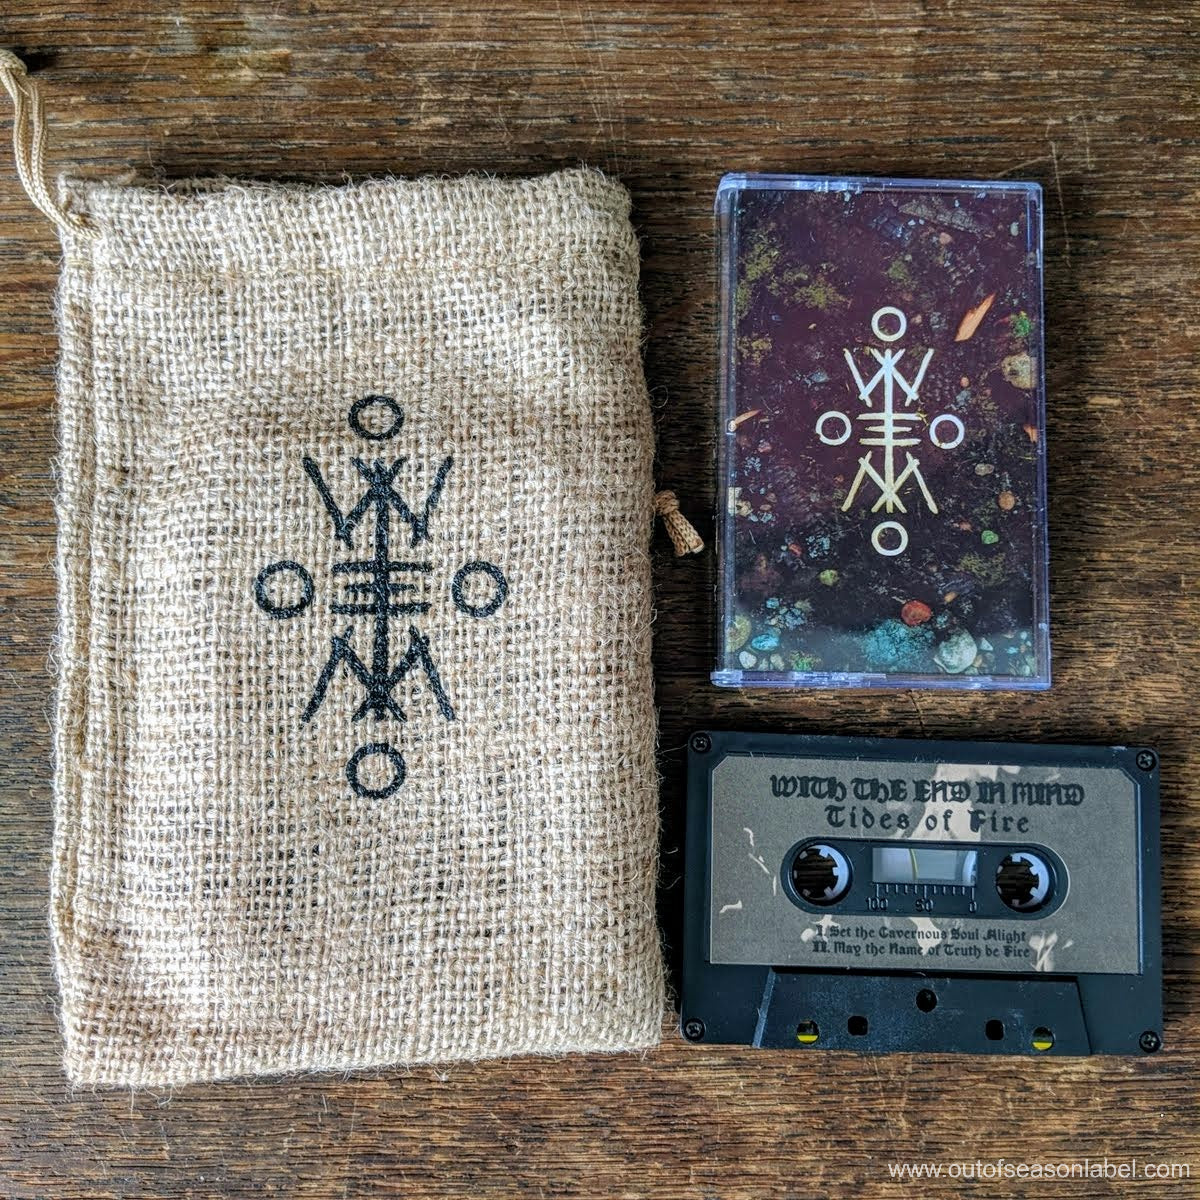 [SOLD OUT] WITH THE END IN MIND "Tides of Fire" Cassette Tape